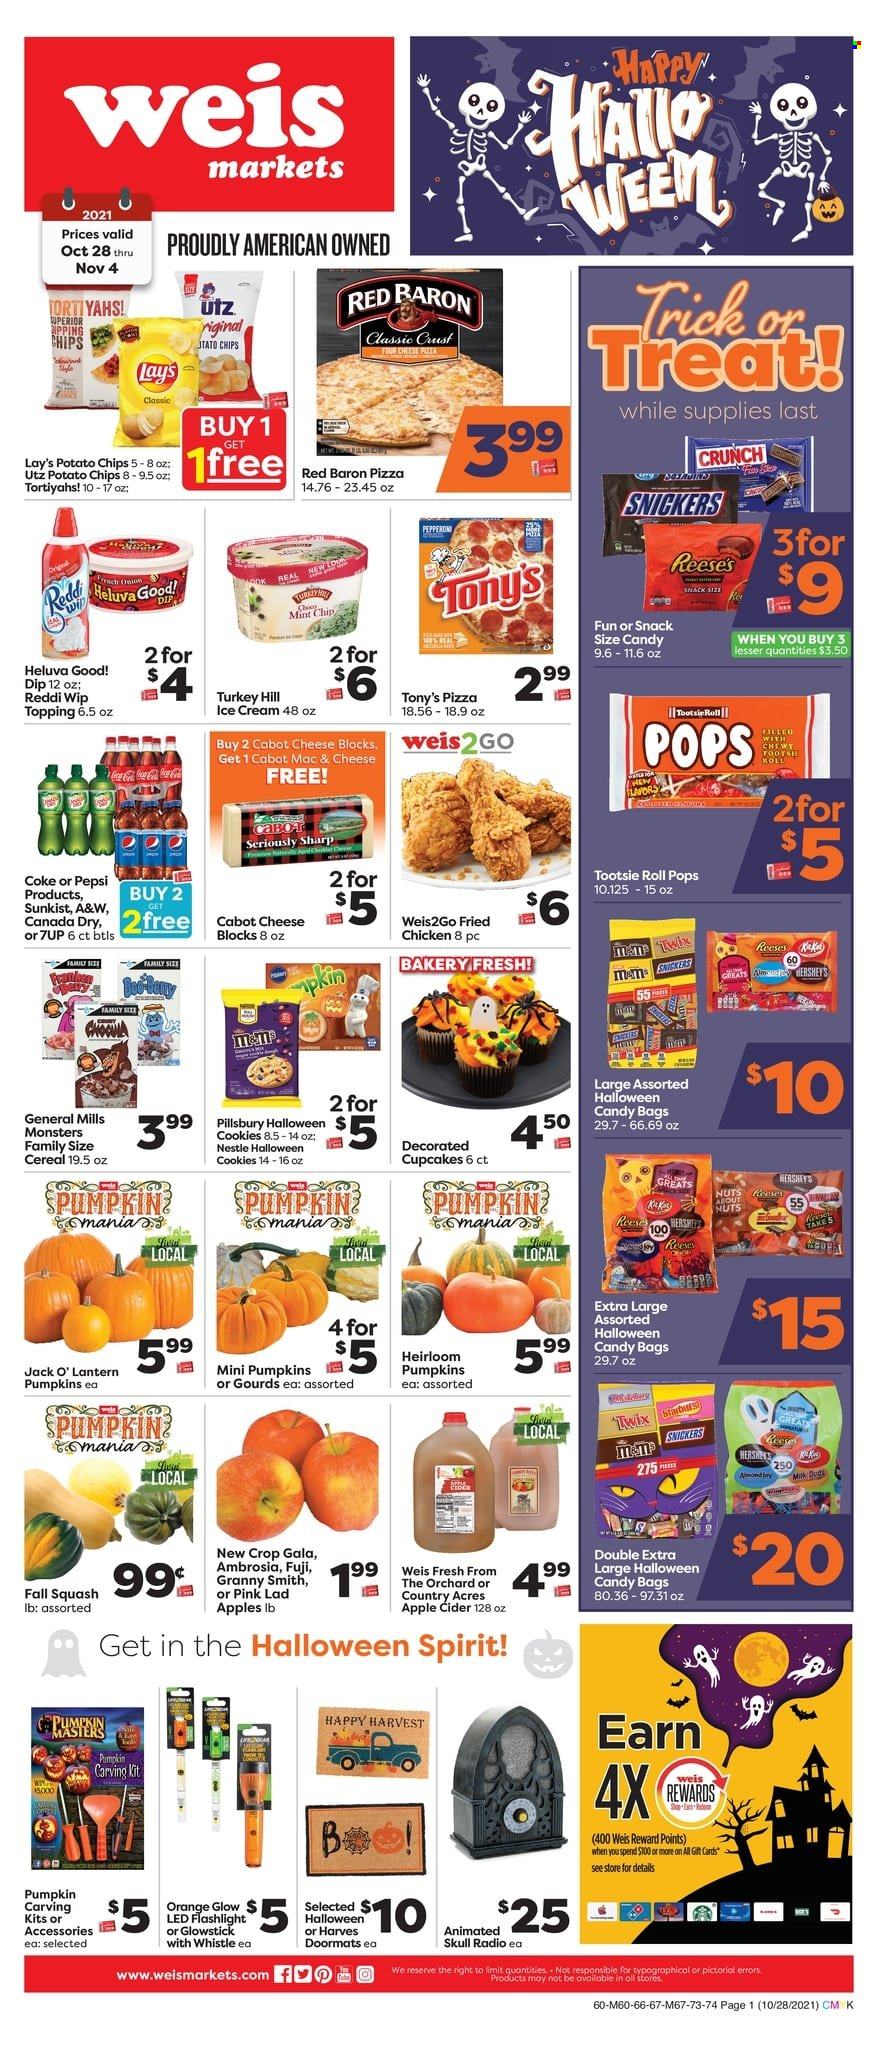 thumbnail - Weis Flyer - 10/28/2021 - 11/04/2021 - Sales products - cupcake, pumpkin, Gala, oranges, Granny Smith, pizza, fried chicken, Pillsbury, pepperoni, dip, ice cream, Reese's, Hershey's, Red Baron, cookies, Nestlé, Twix, Starburst, potato chips, chips, Lay’s, topping, cereals, Canada Dry, Coca-Cola, Pepsi, 7UP, A&W, apple cider, cider, lantern, Halloween, radio. Page 1.